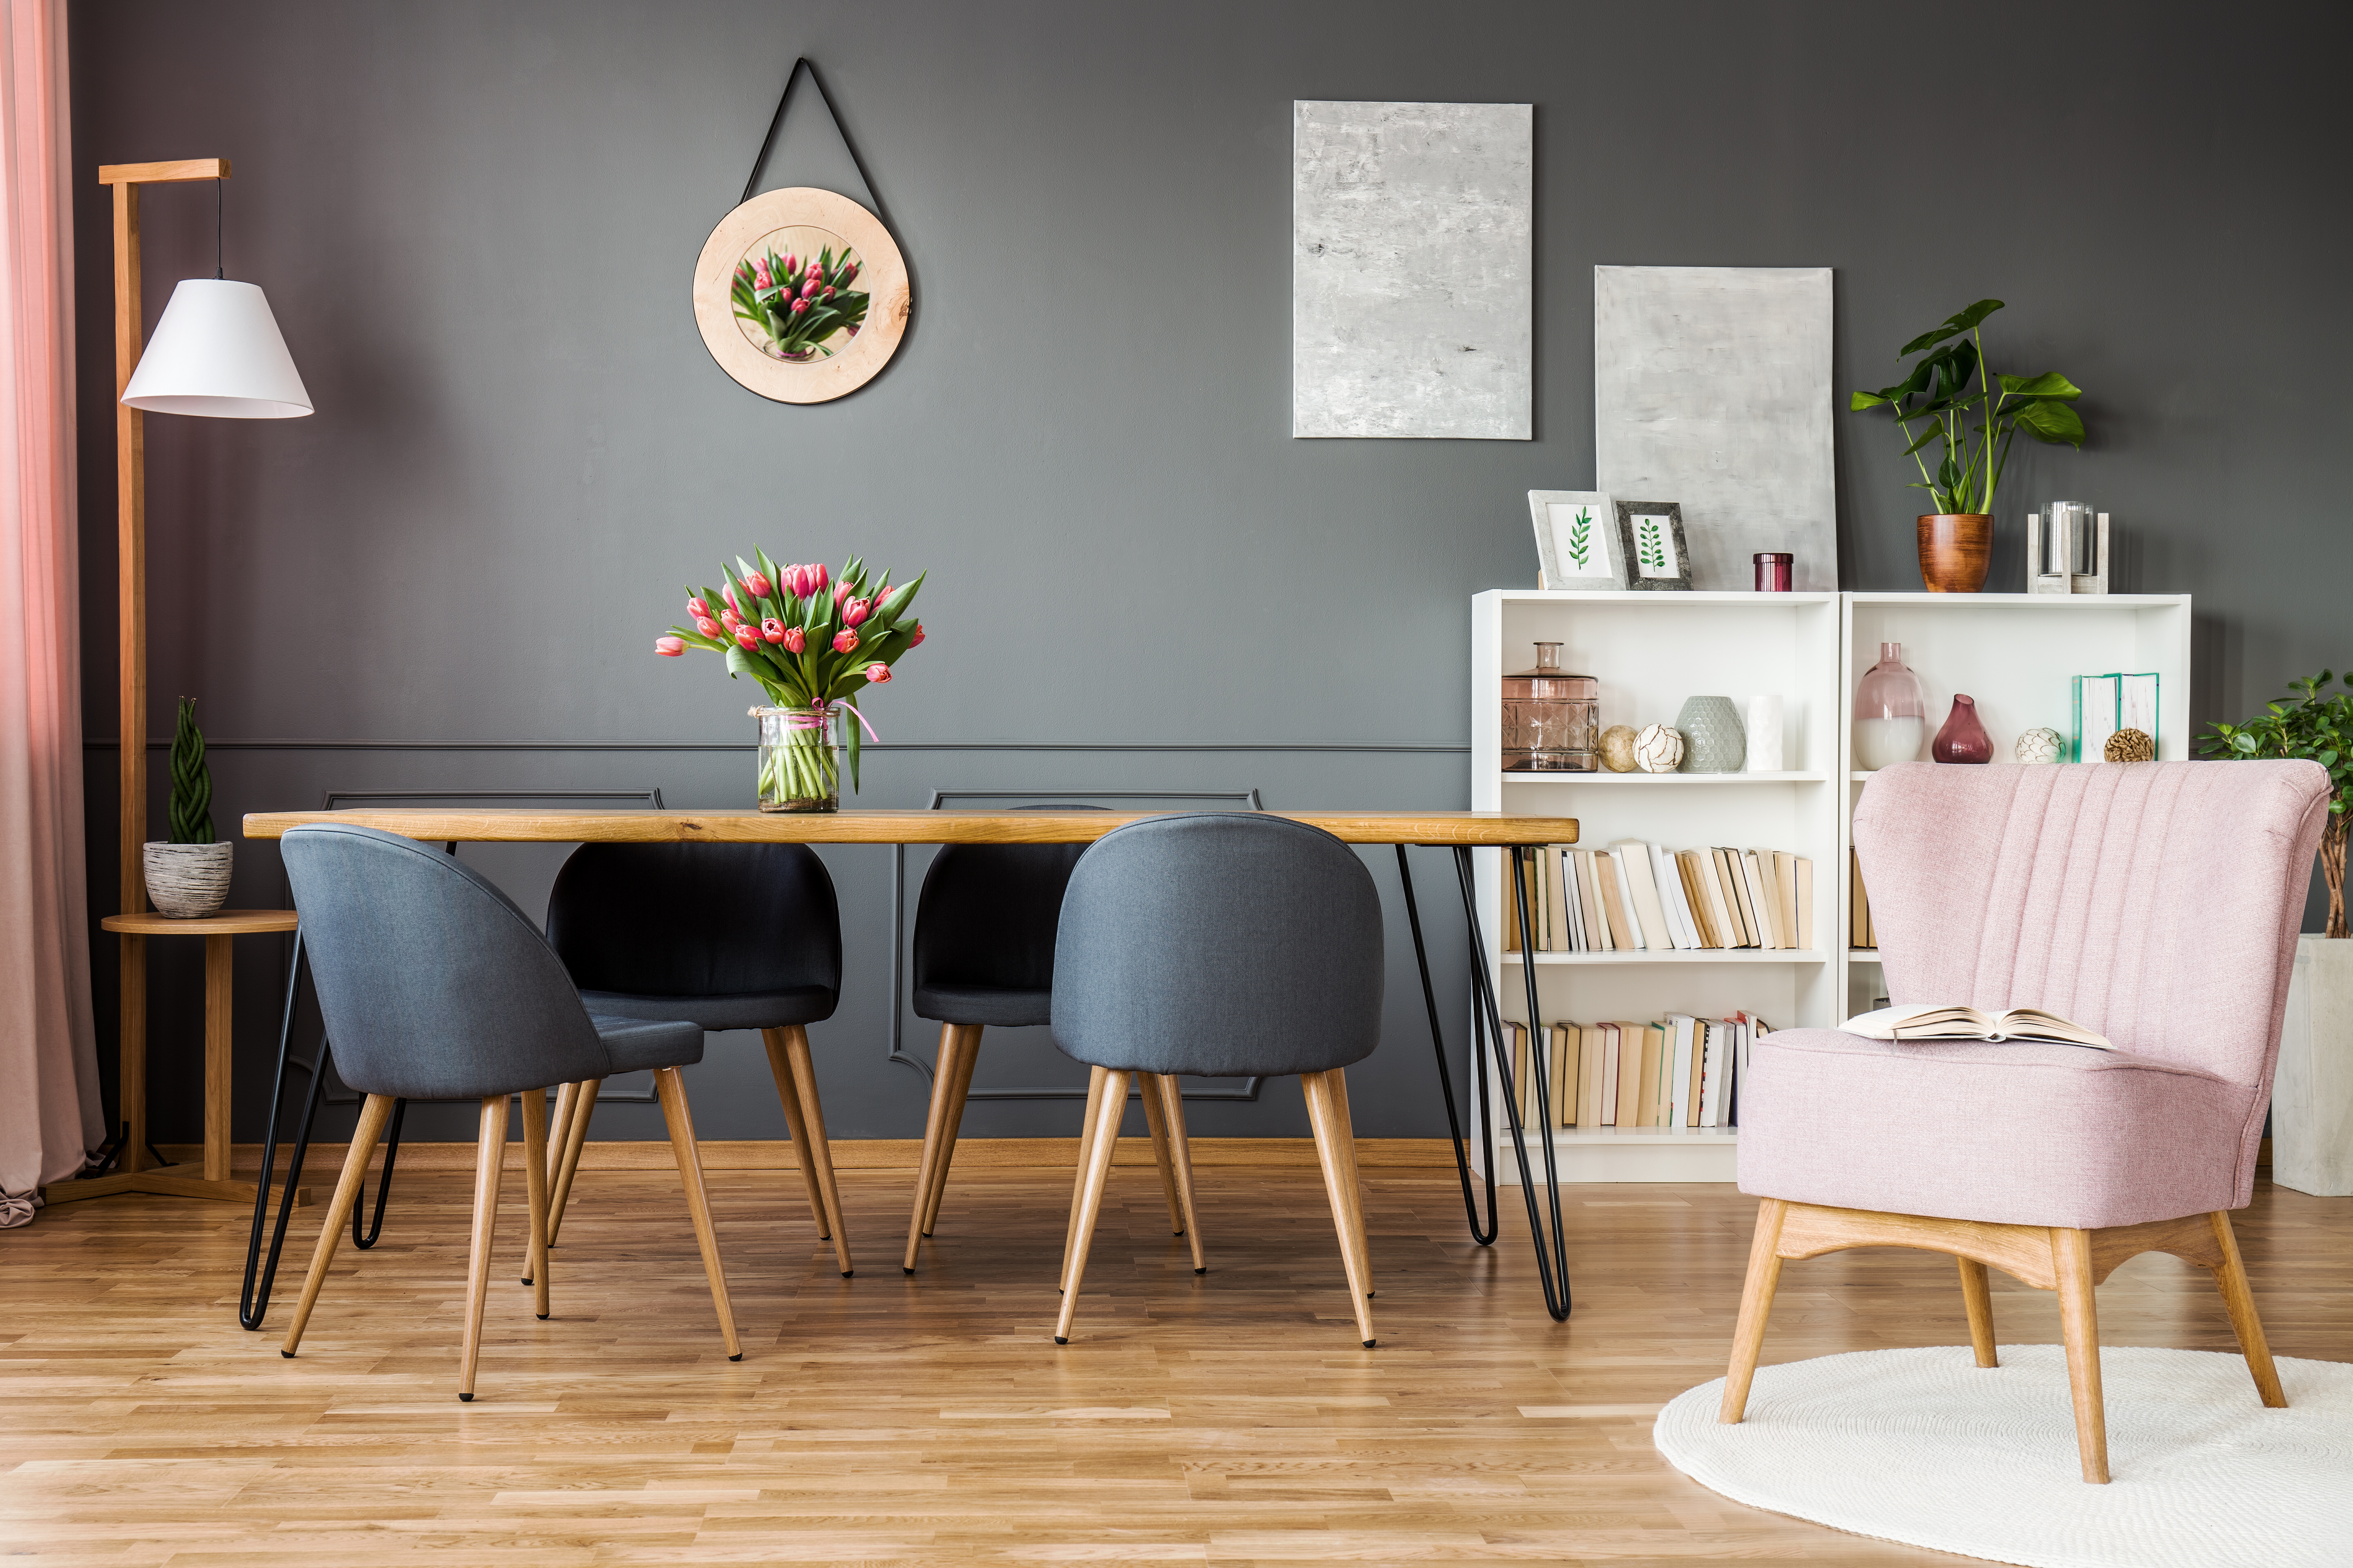 pink-and-grey-dining-room-p5rzab6.jpg